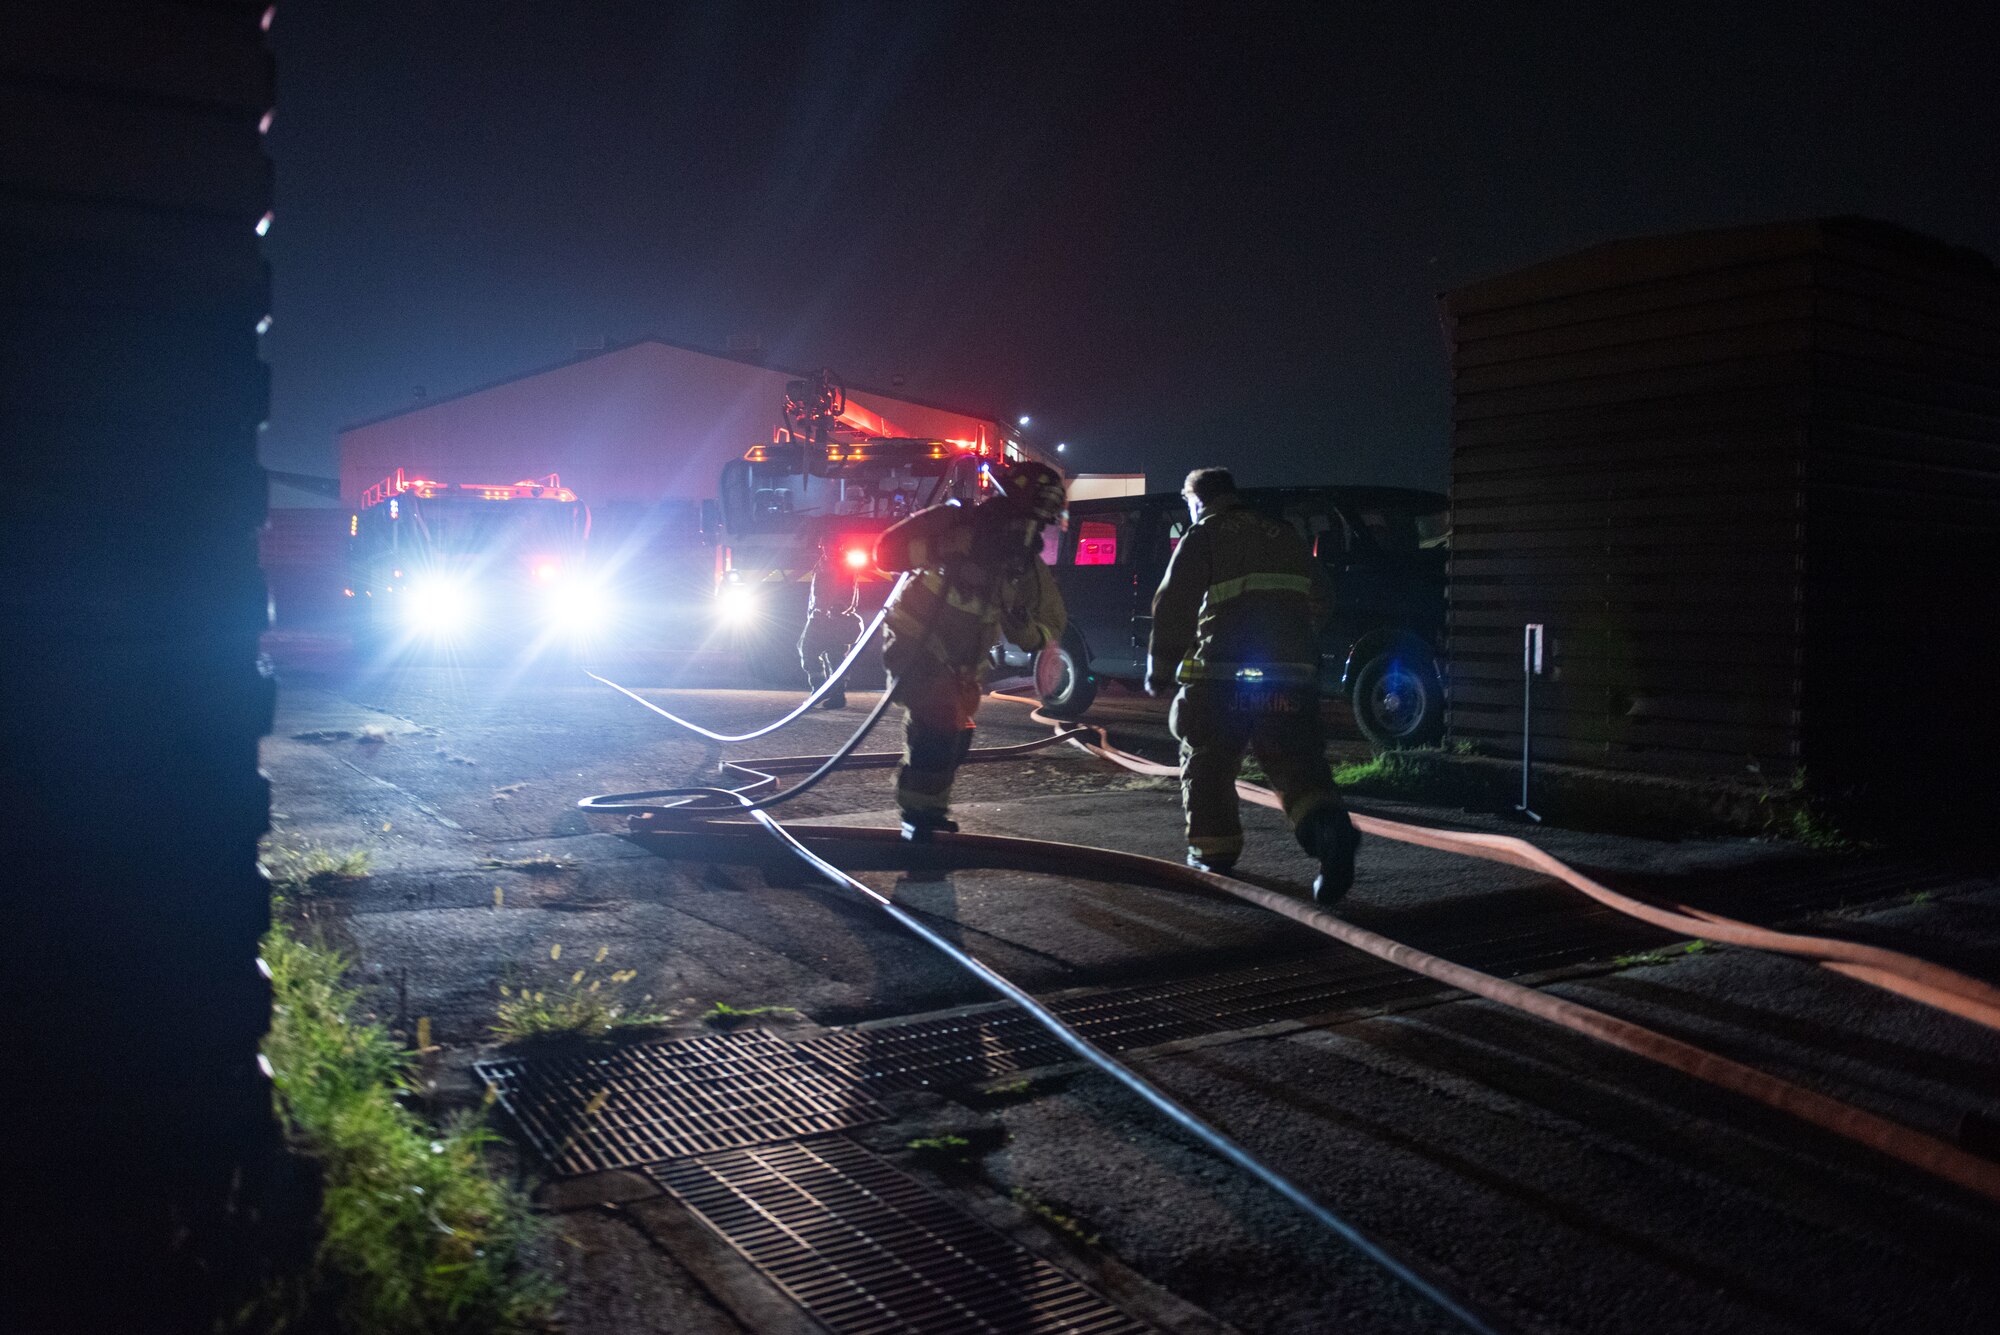 U.S Air Force Staff Sgt. Benny Bowen and U.S. Air Force Senior Airman Jacob Jenkins, 51st Civil Engineer Squadron lead firefighters, set up hoses during a fire response scenario at Osan Air Base, Republic of Korea, Sept. 12, 2022, in support of a wing training event.